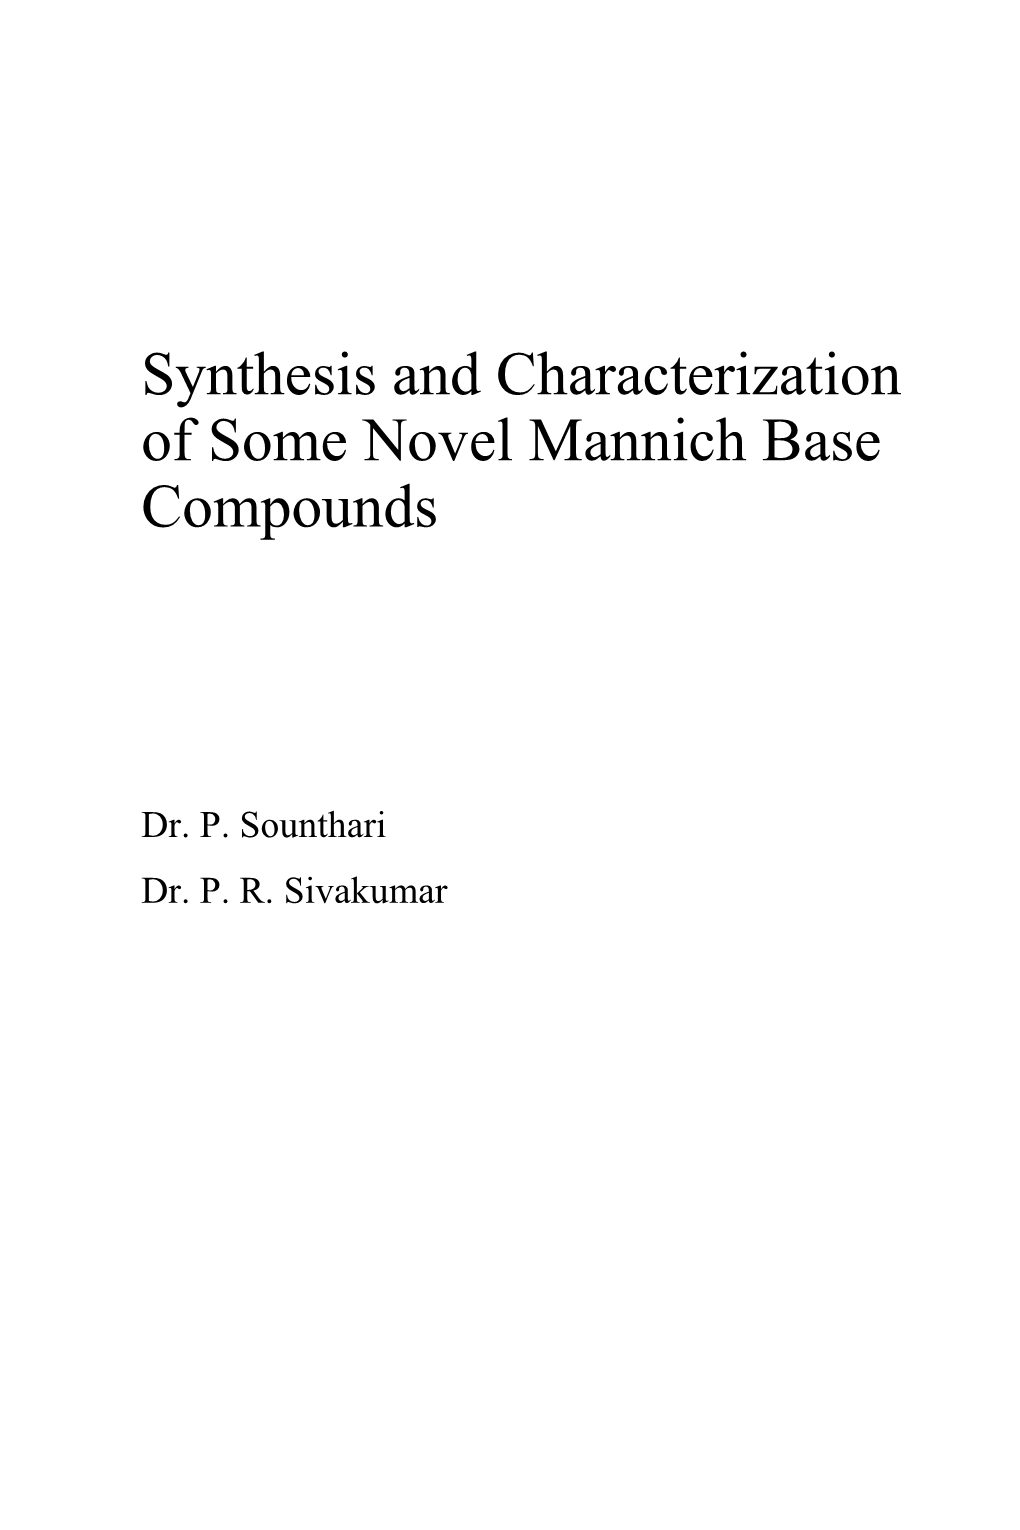 Synthesis and Characterization of Some Novel Mannich Base Compounds